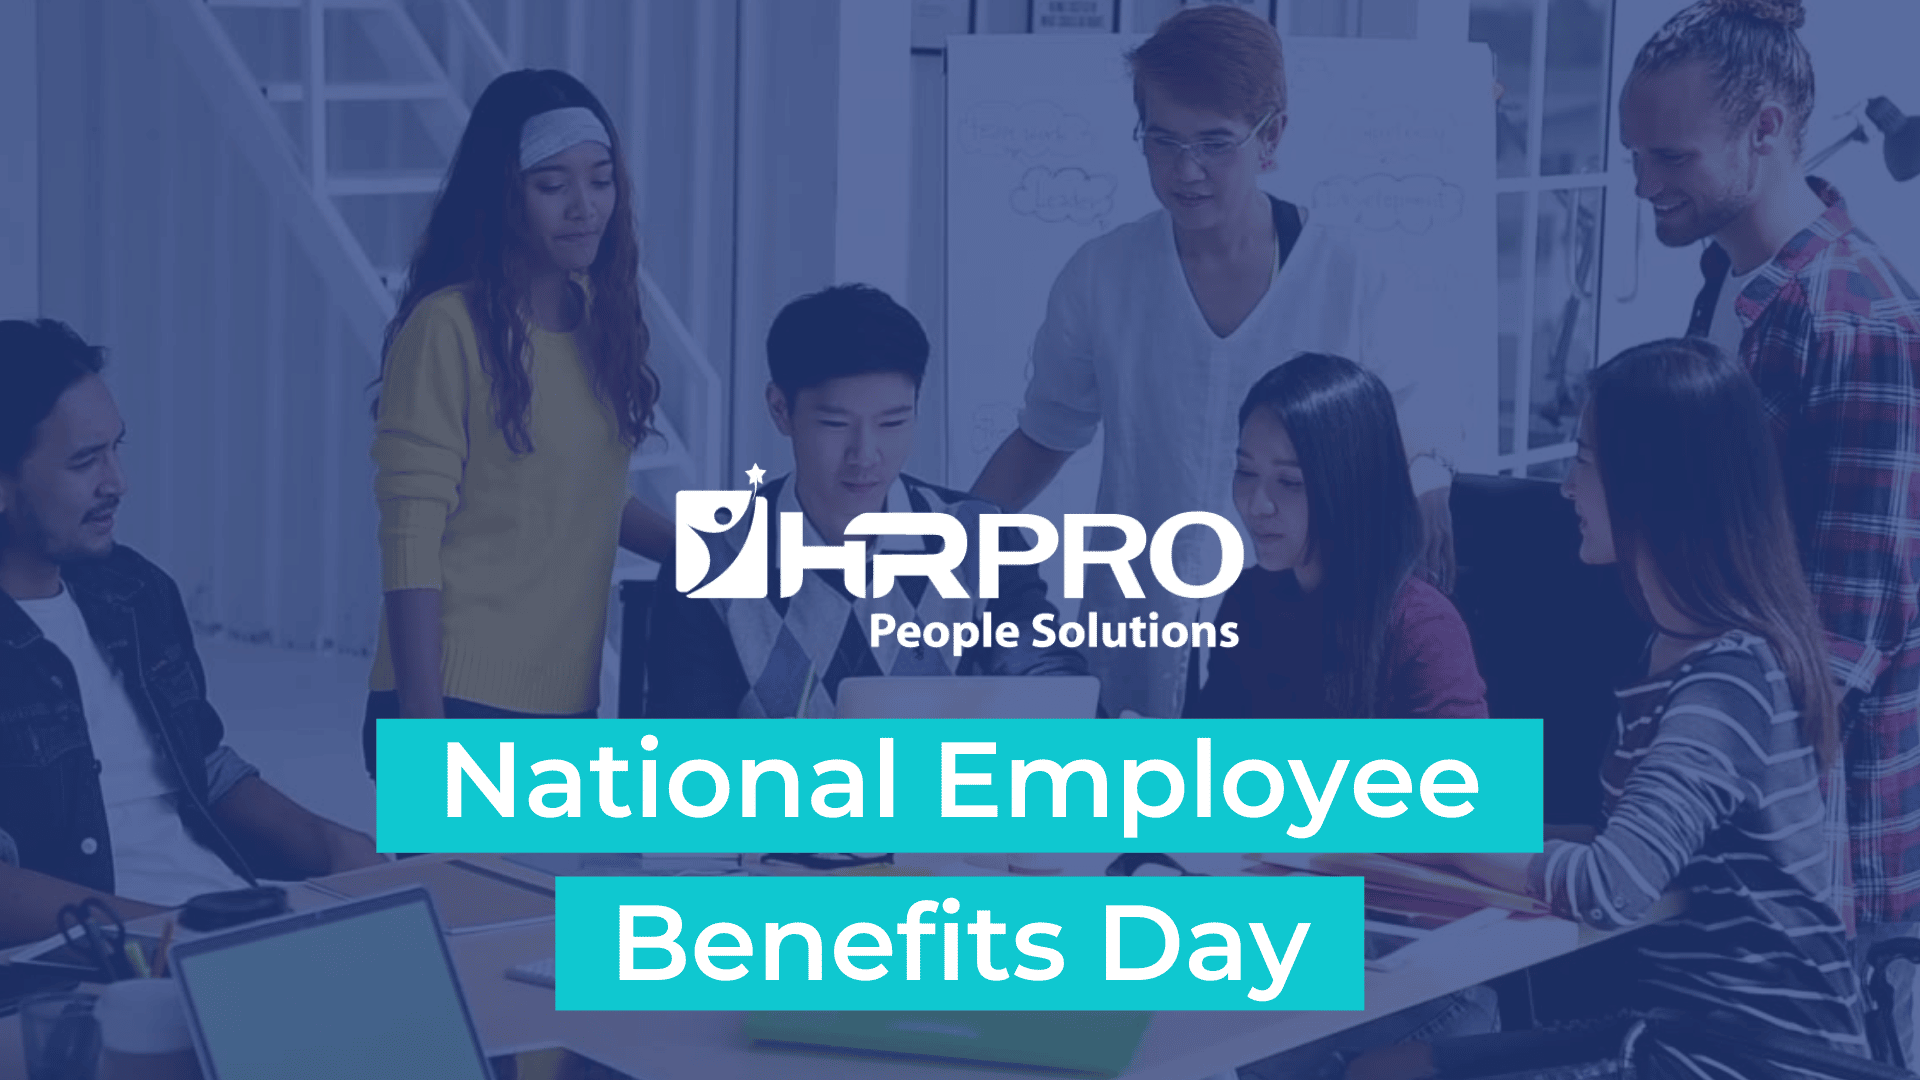 HR Pro People Solutions banner